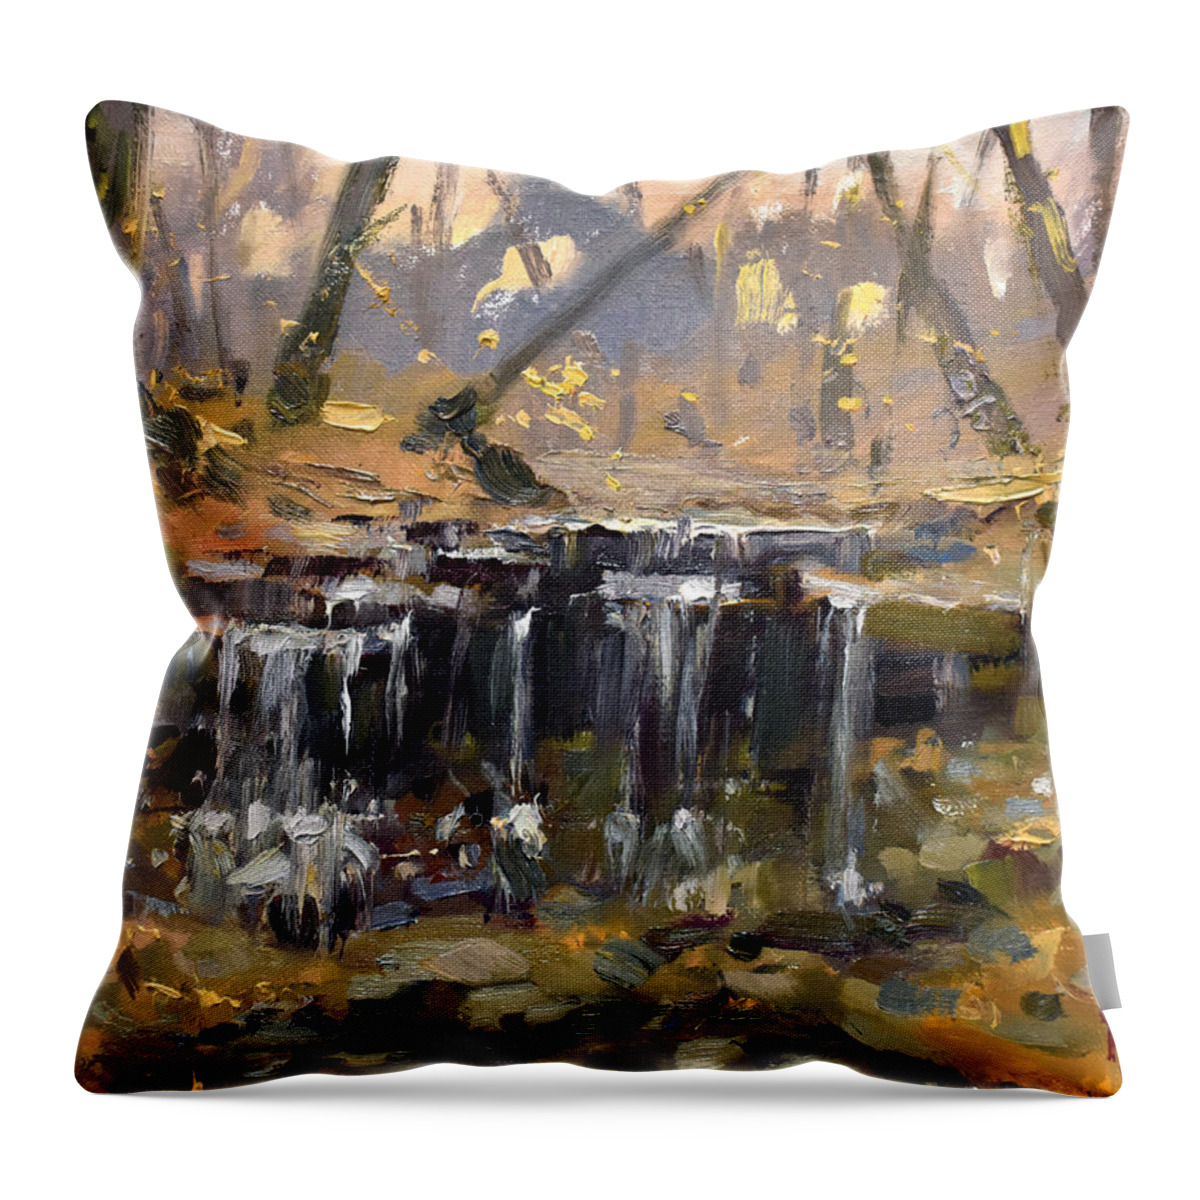 Waterfalls Throw Pillow featuring the painting Waterfalls at Lockport Nature Trail by Ylli Haruni